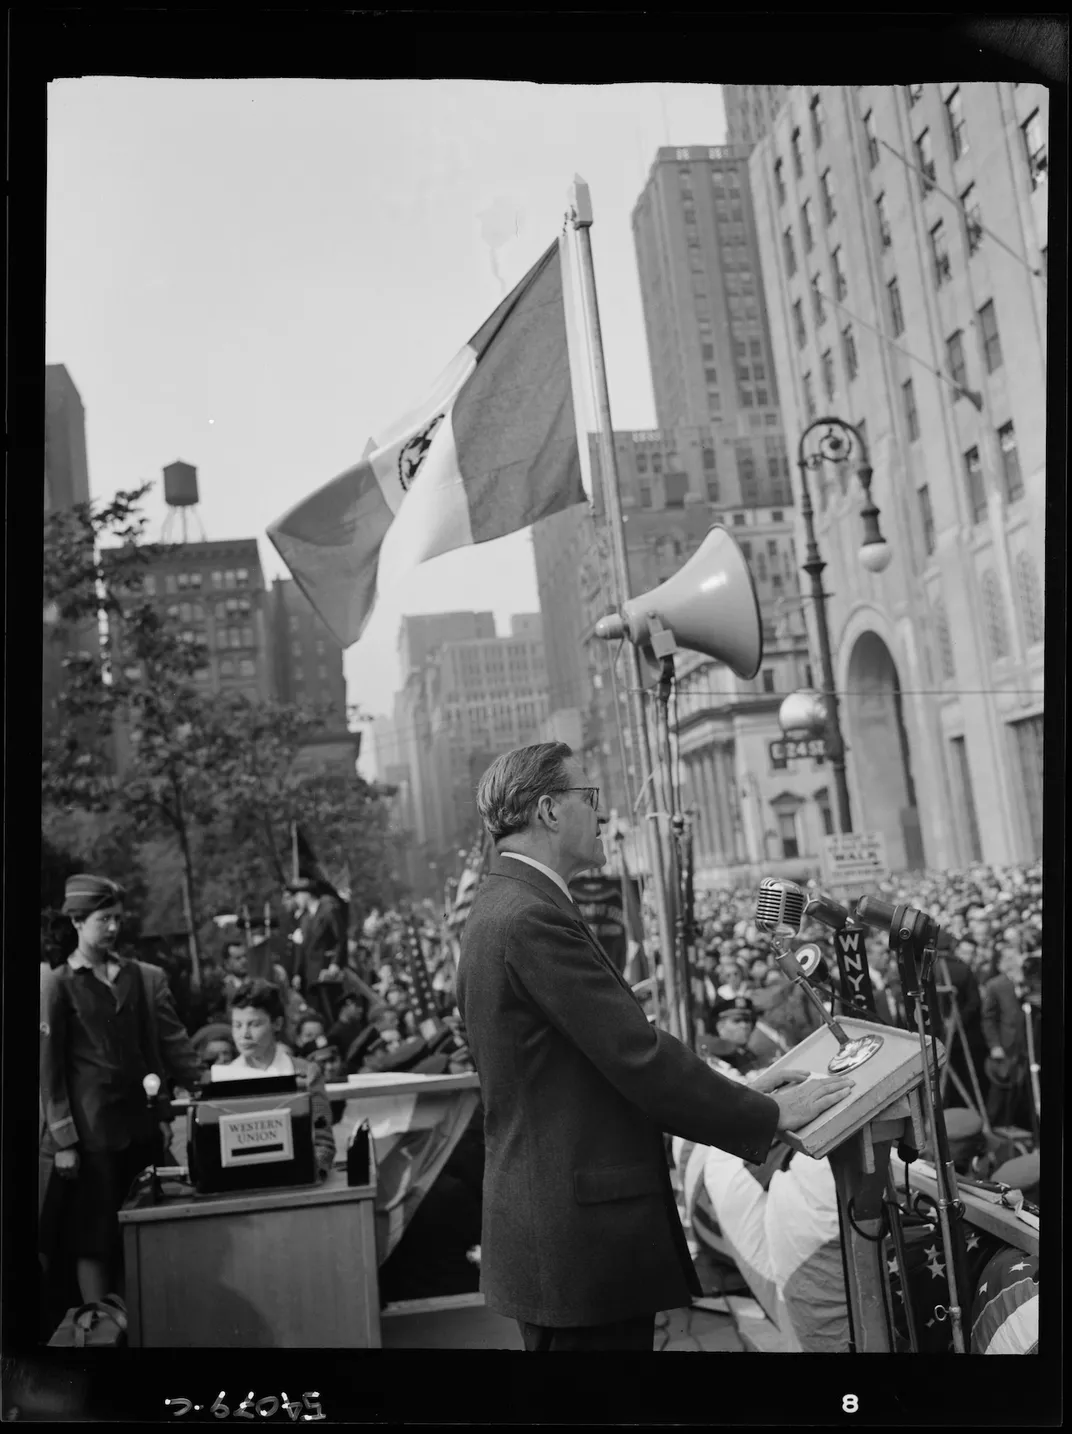 Rabbi Stephen Wise addresses a crowd at a rally outside Madison Square Garden in June 1944